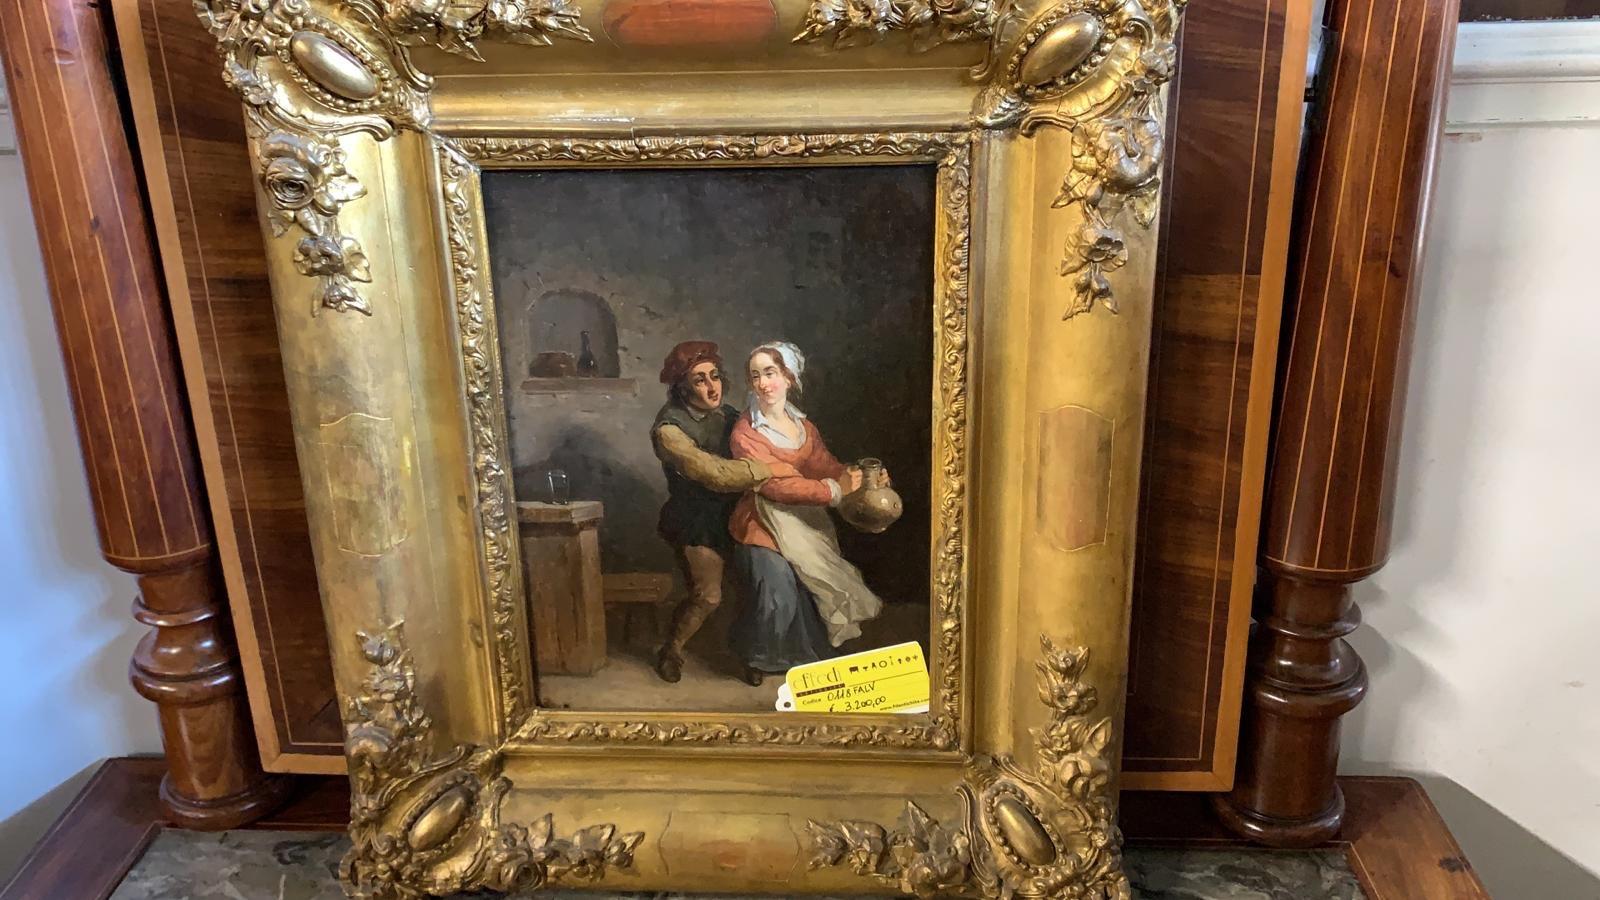 Small picture of Flemish school, Classic scene of tavern life, excellent hand of the painter, the painting is signed in the lower right corner, for the moment we have no attribution, it is being studied, circa 1750-1760. Golden frame. The painting